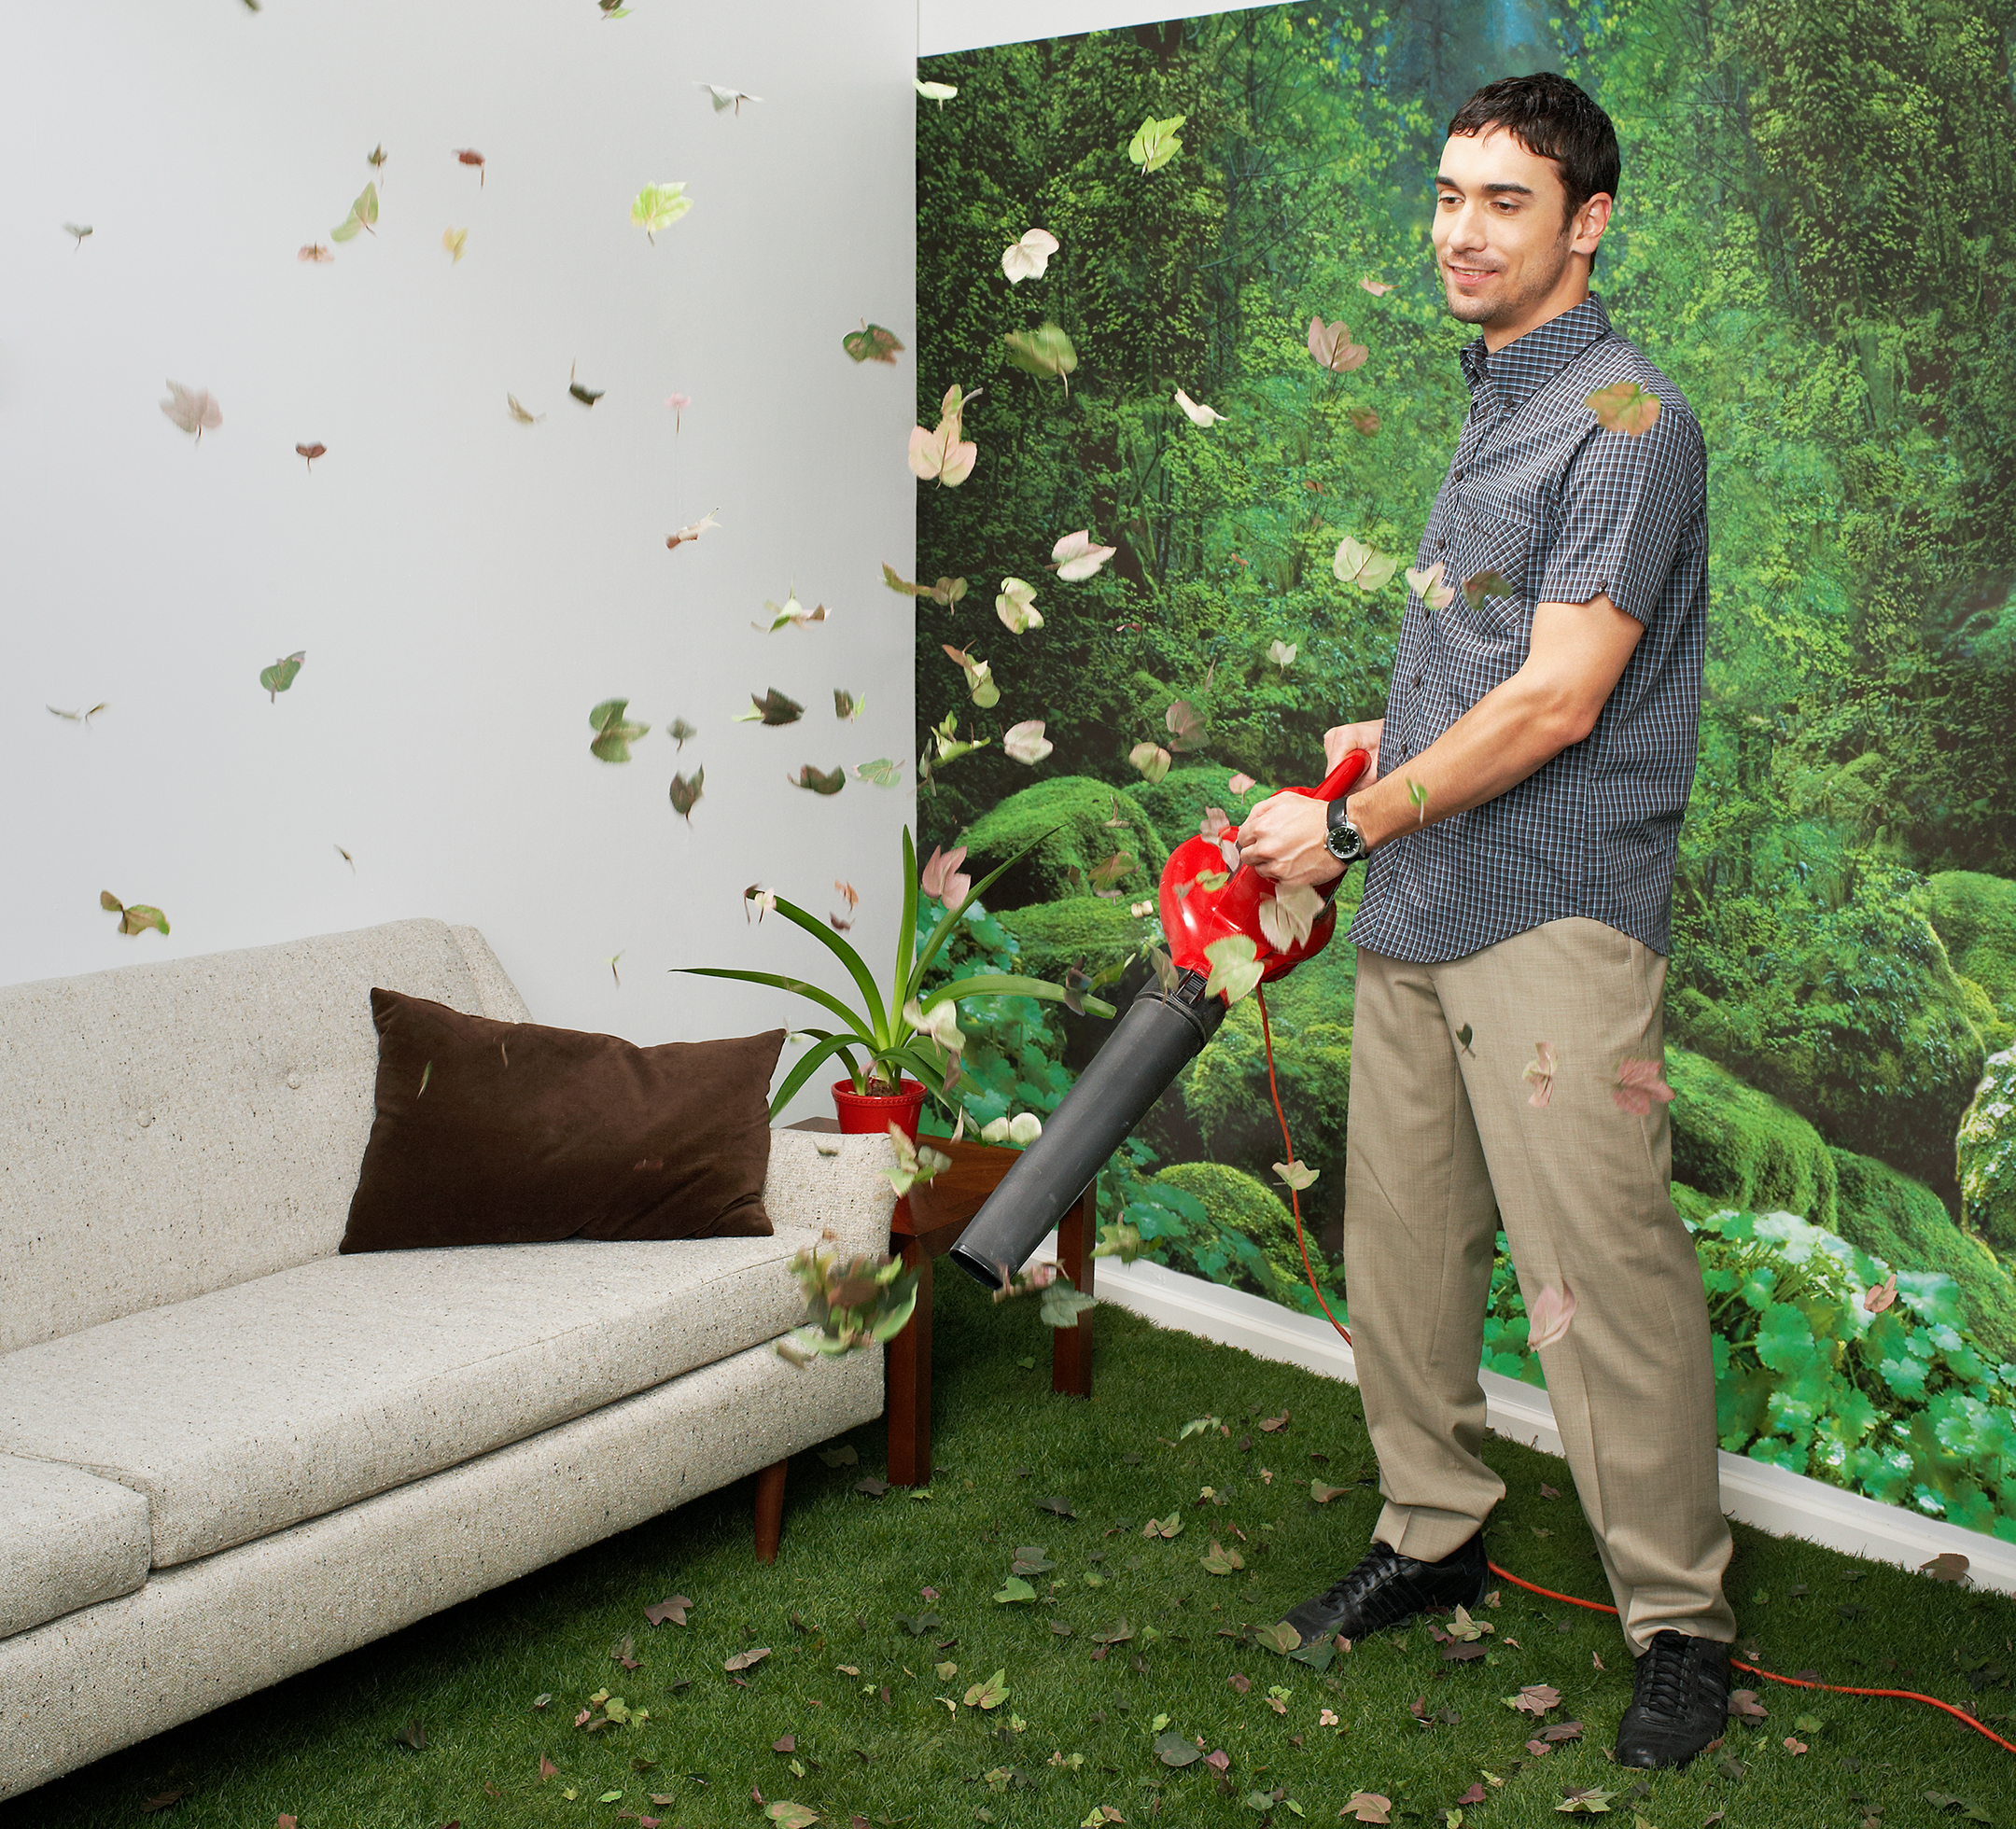 Young man blowing leaves in living room decorated with nature